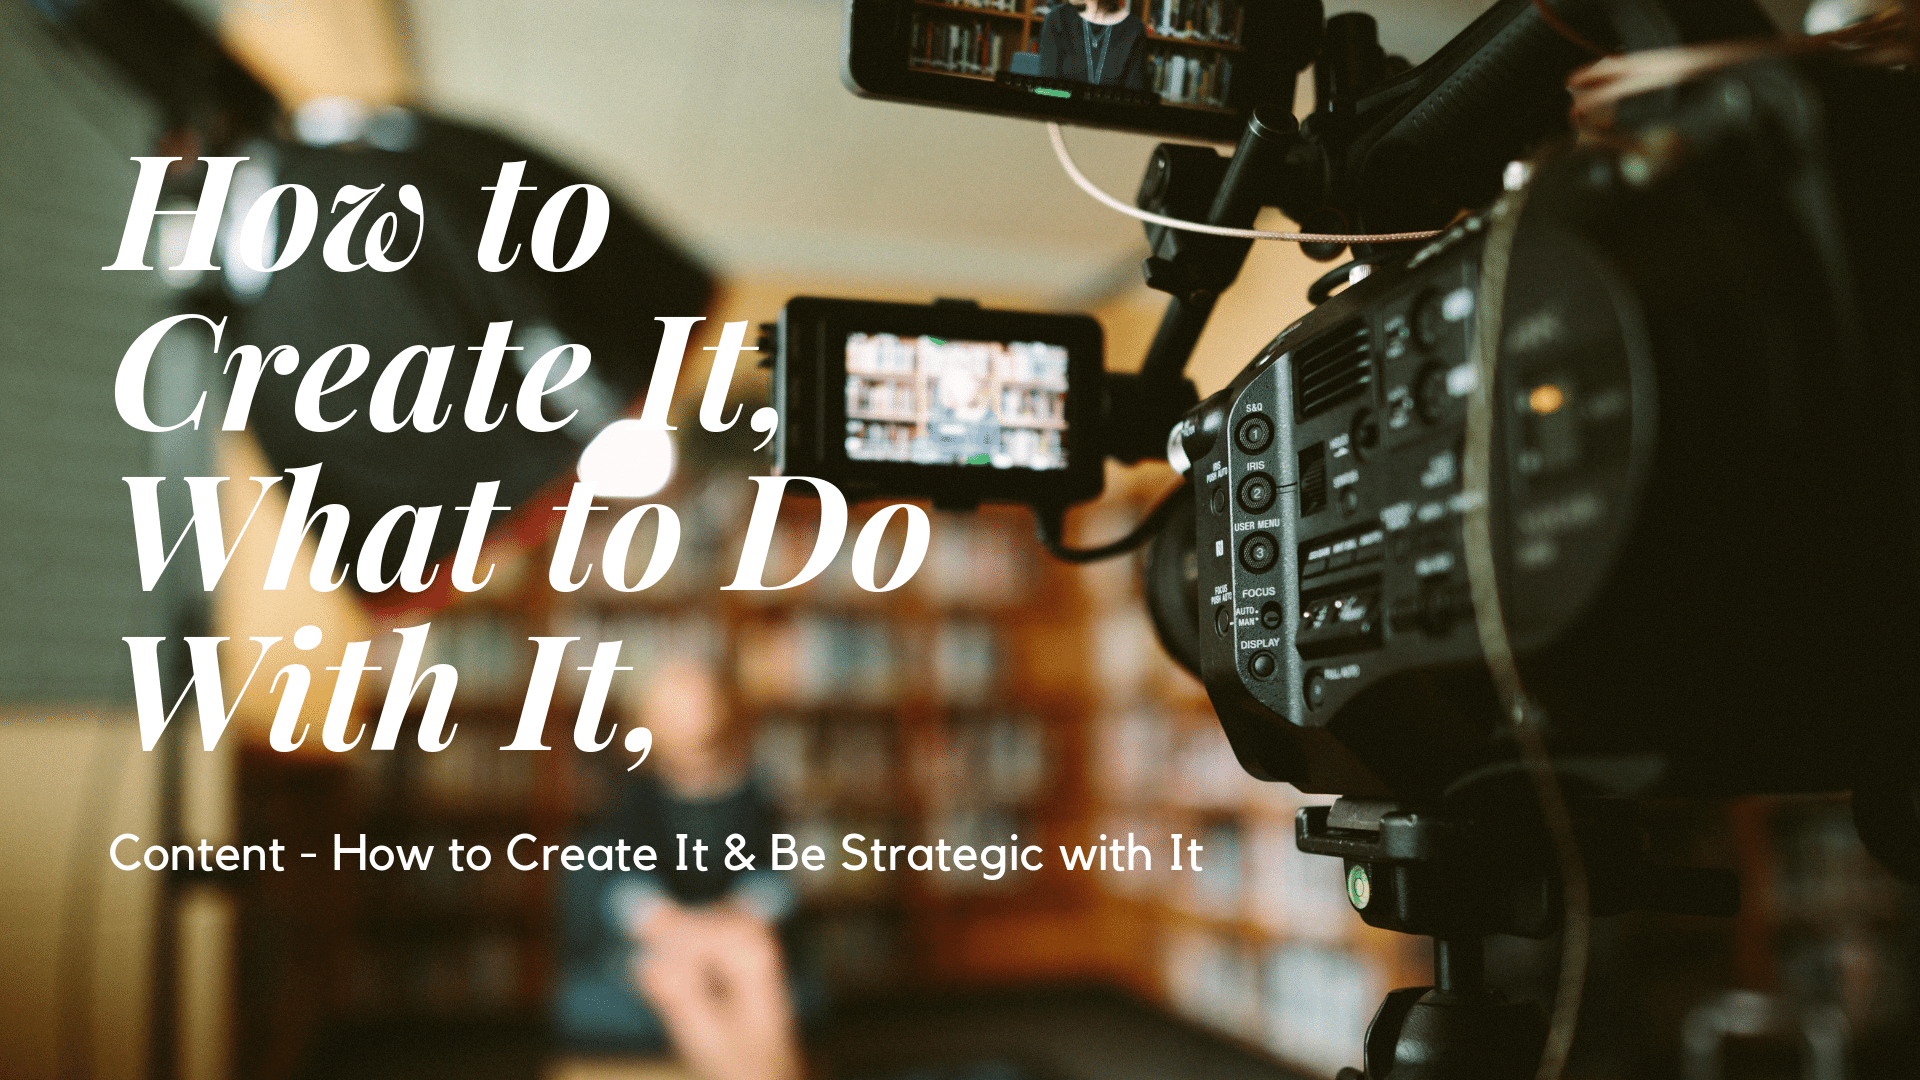 Canned Heat Podcast Episode 14: Content – How to Create It & Be Strategic with It